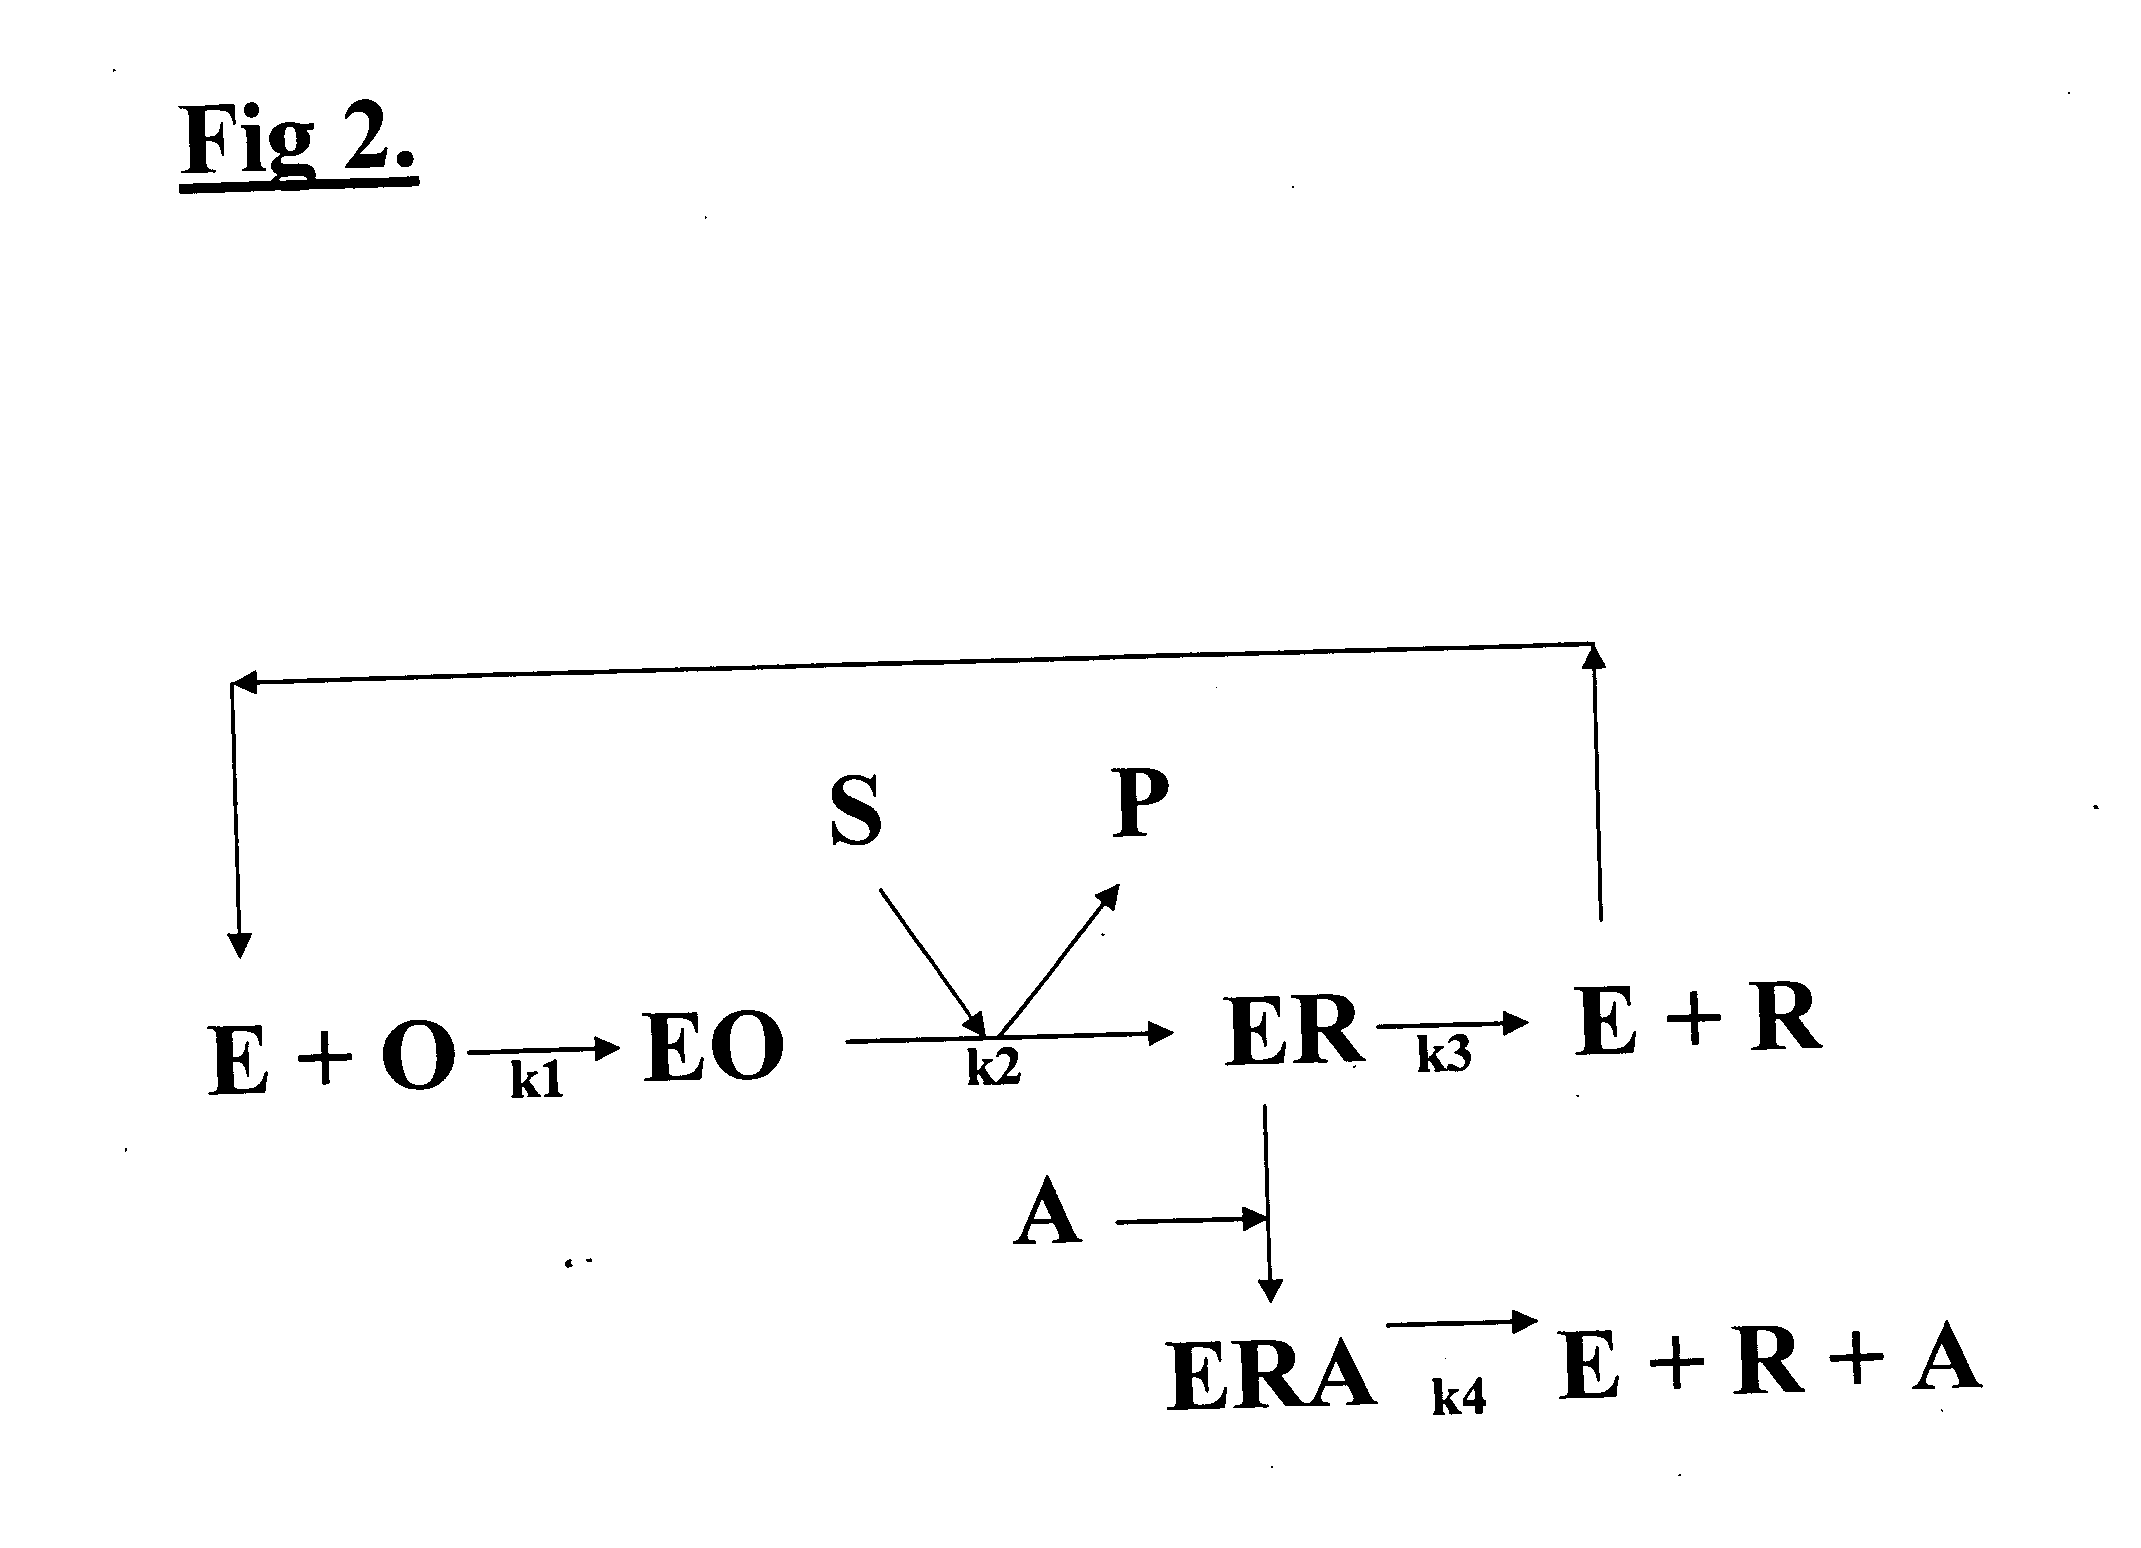 Composition for stimulation of specific metallo-enzymes